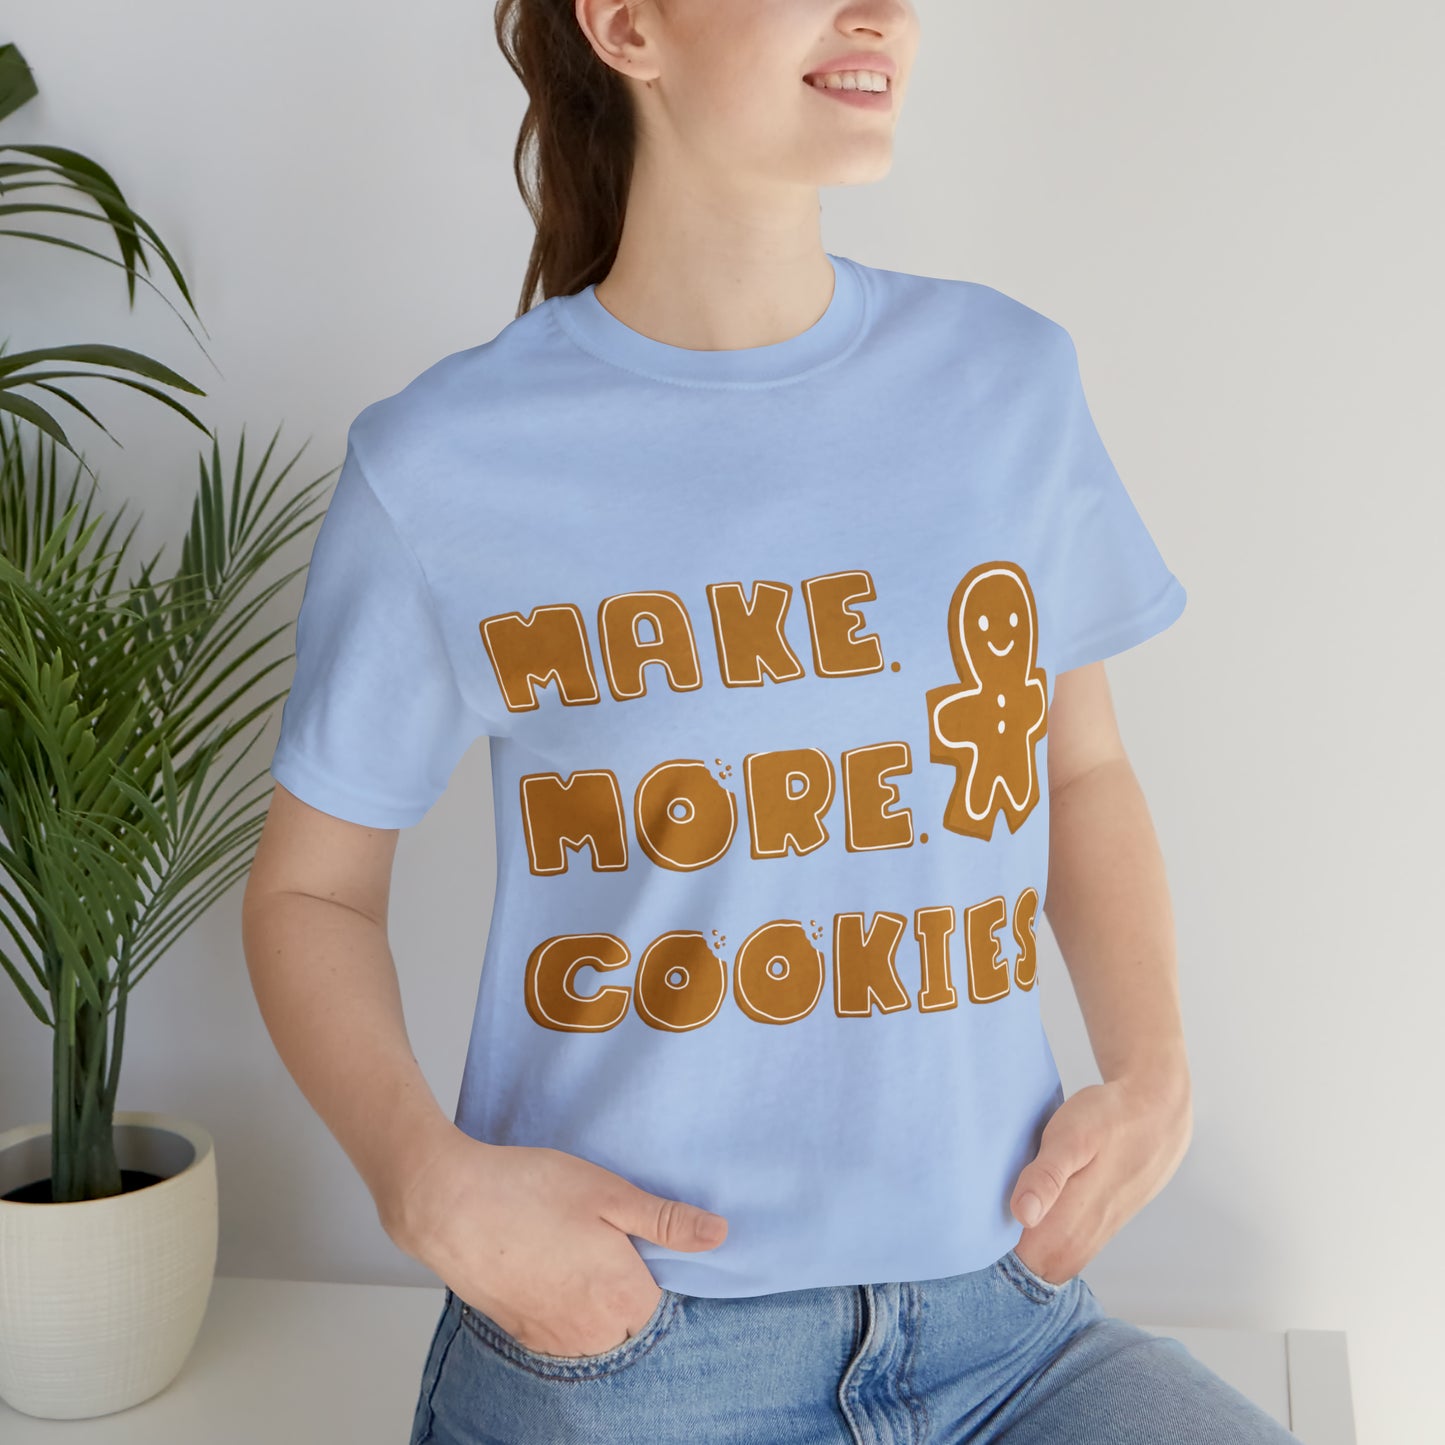 Baking, Make More Cookies, Gingerbread- Adult, Full Size Image, Regular Fit, Soft Cotton, T-shirt